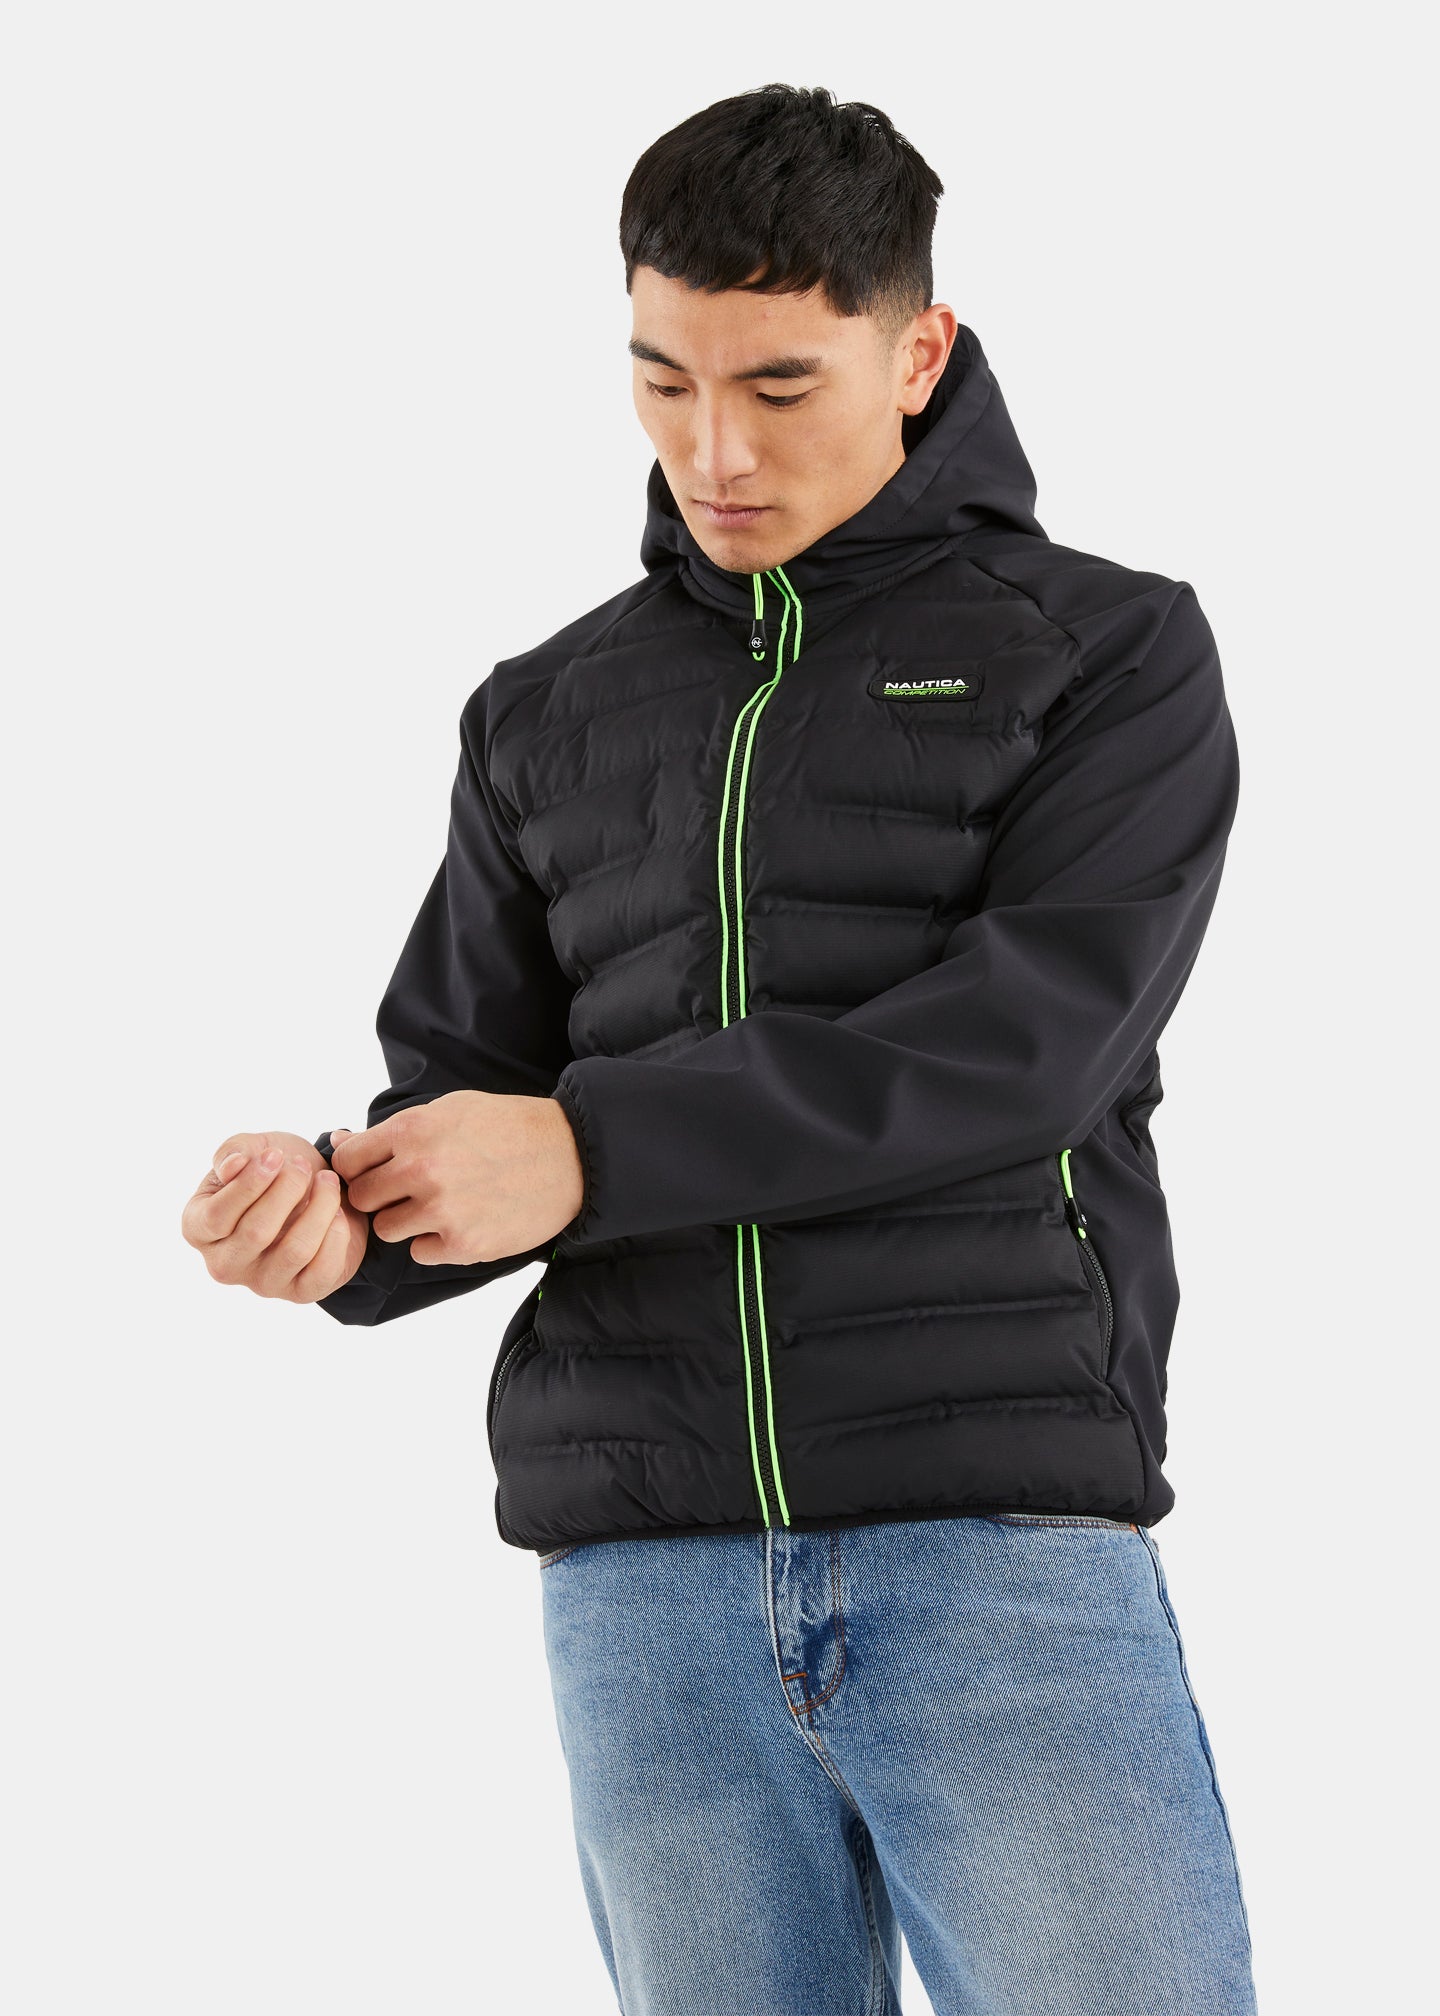 Nautica Competition Mens Coats & Jackets – Tagged 